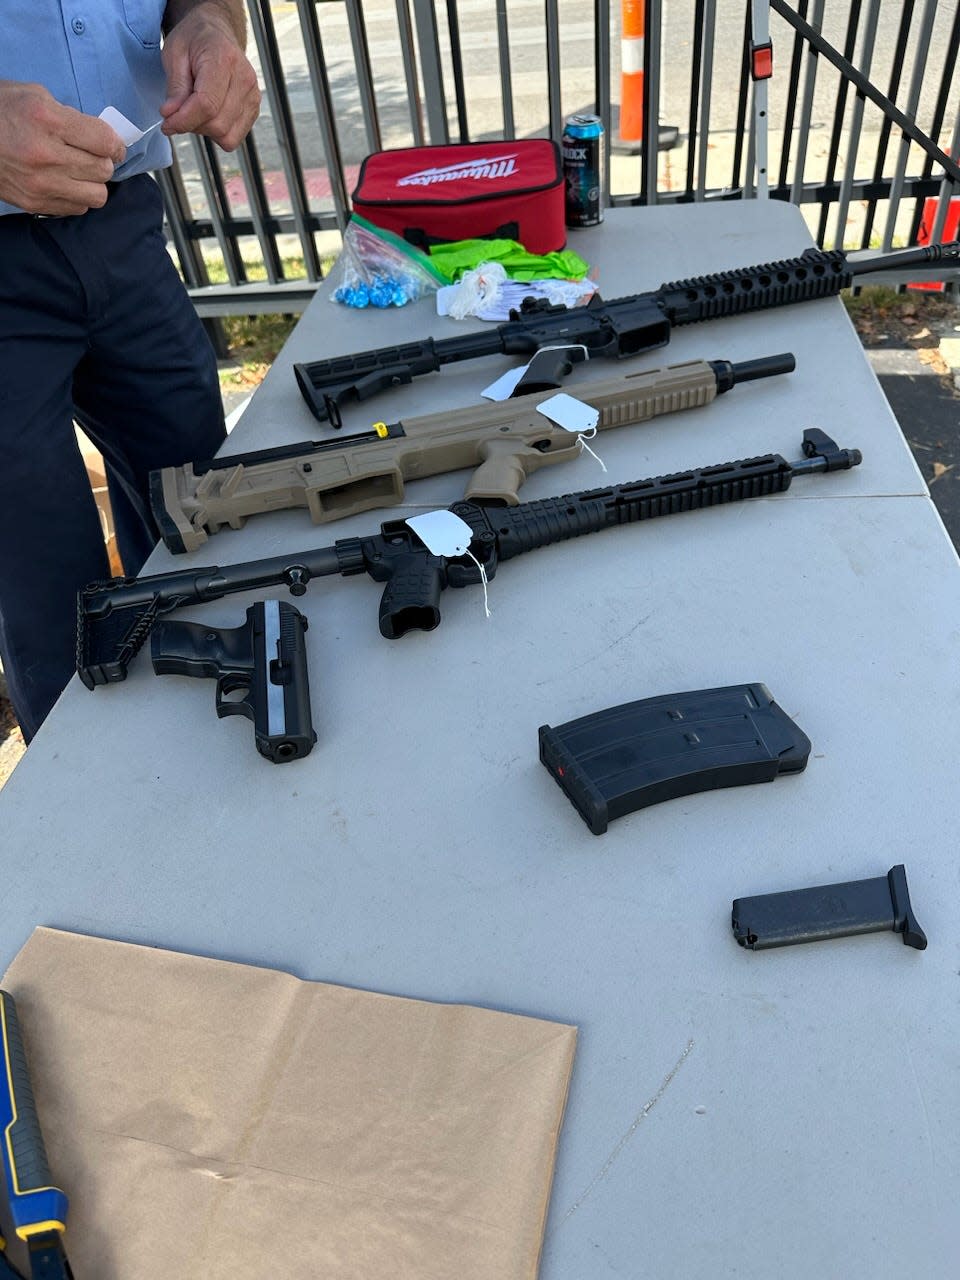 Firearms purchased Saturday during the gun buyback program in the King-Lincoln Bronzeville neighborhood.